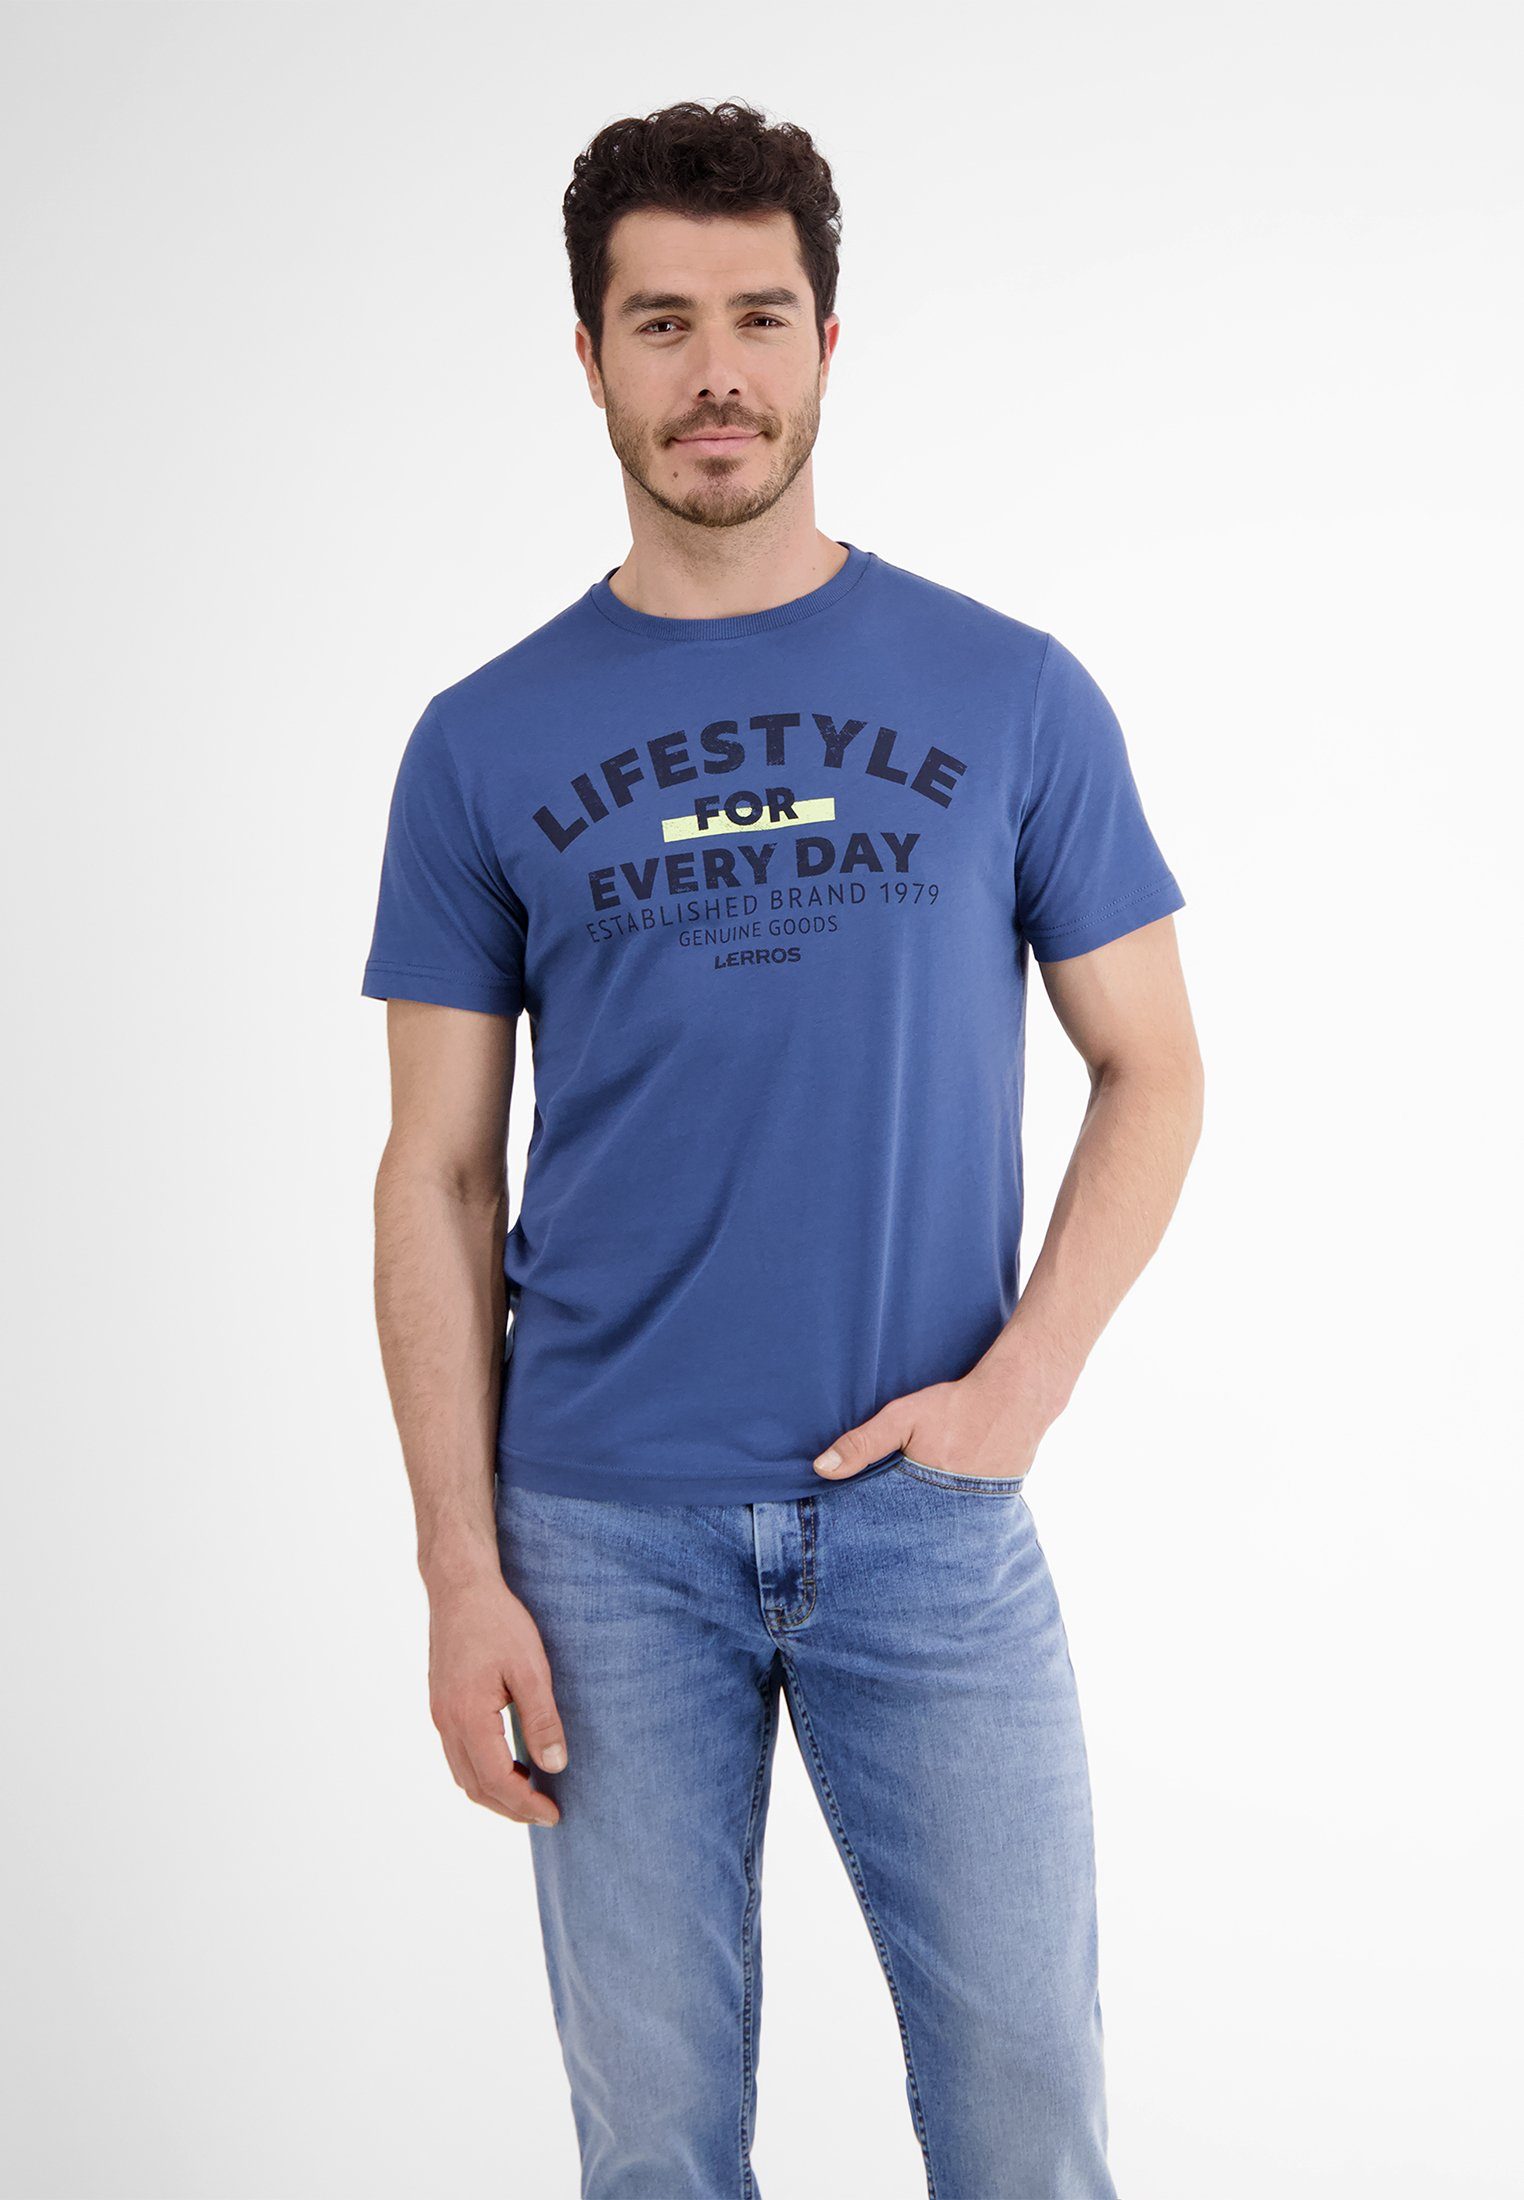 LERROS day* T-Shirt *Lifestyle LERROS every for T-Shirt BLUE